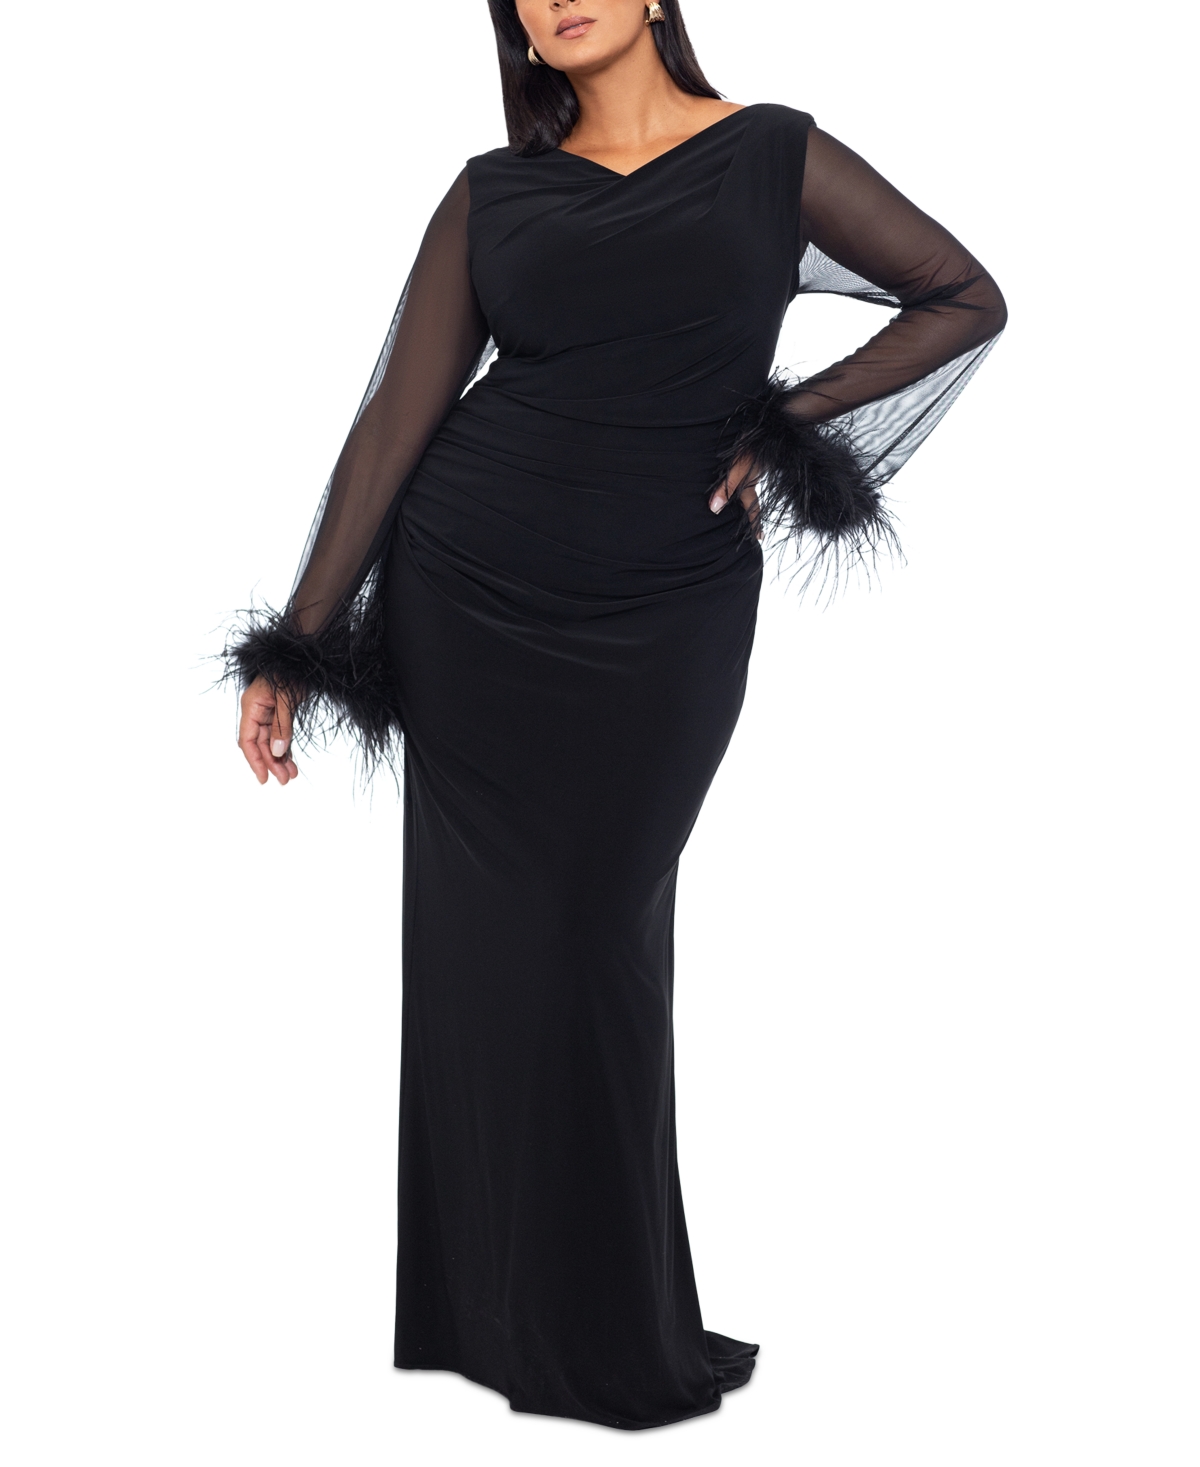 1970s Formal Dress, Evening Gown Photos Betsy  Adam Plus Size Feather-Cuff Sheath Gown - Black $299.00 AT vintagedancer.com